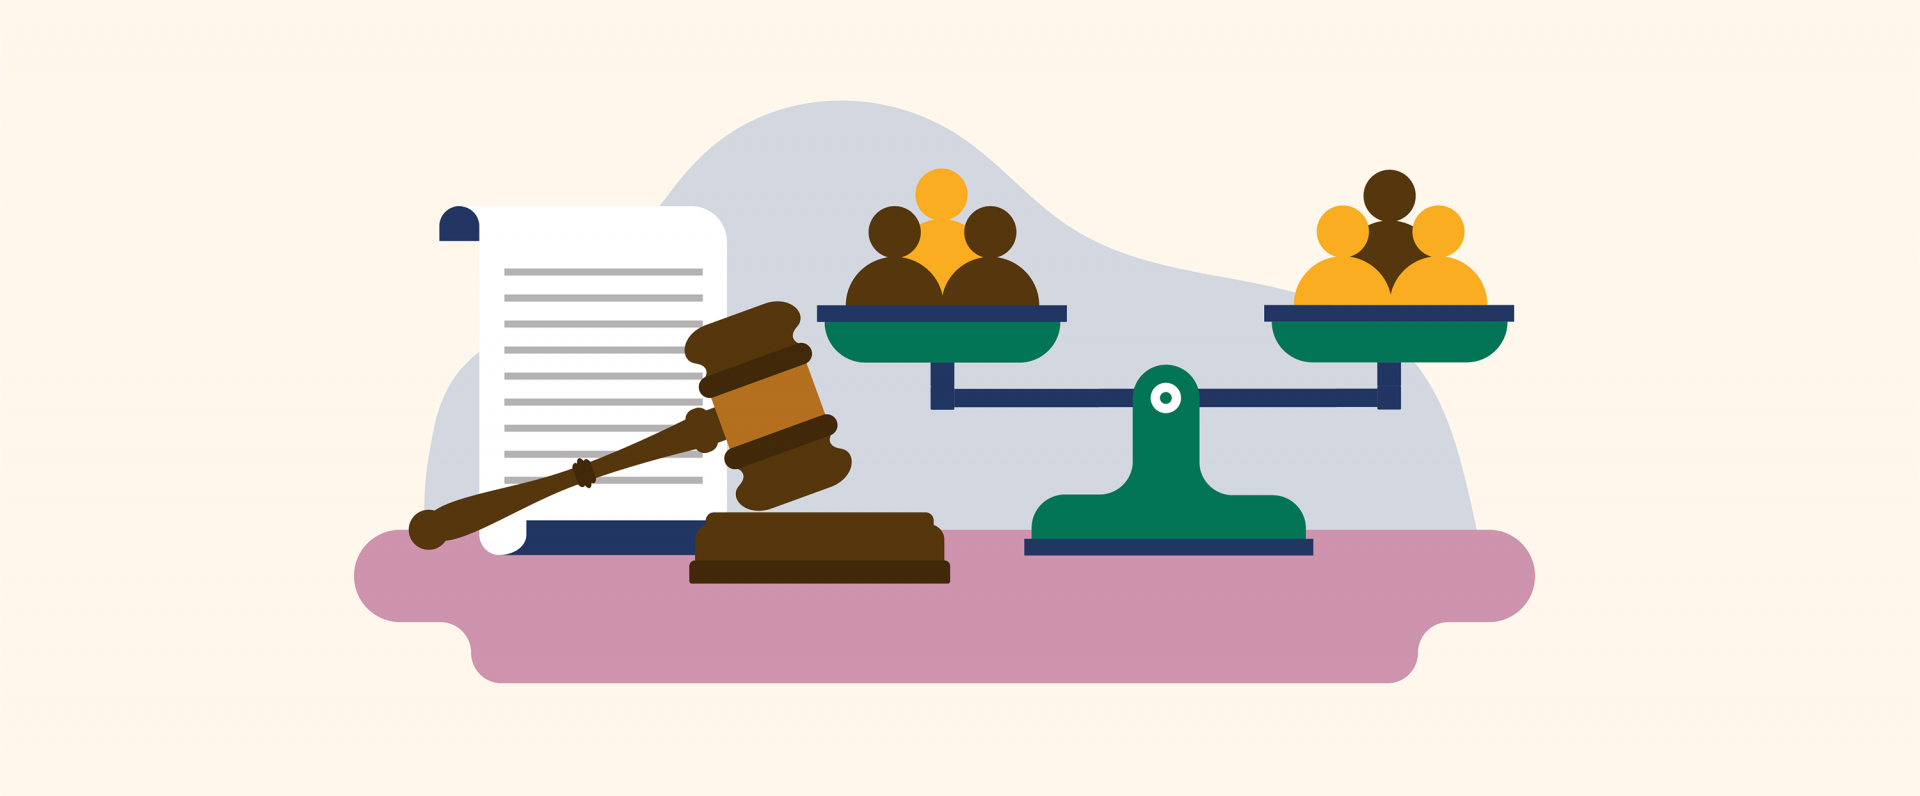 A judicial scale with three people icons on each side, a judges gavel and a written document